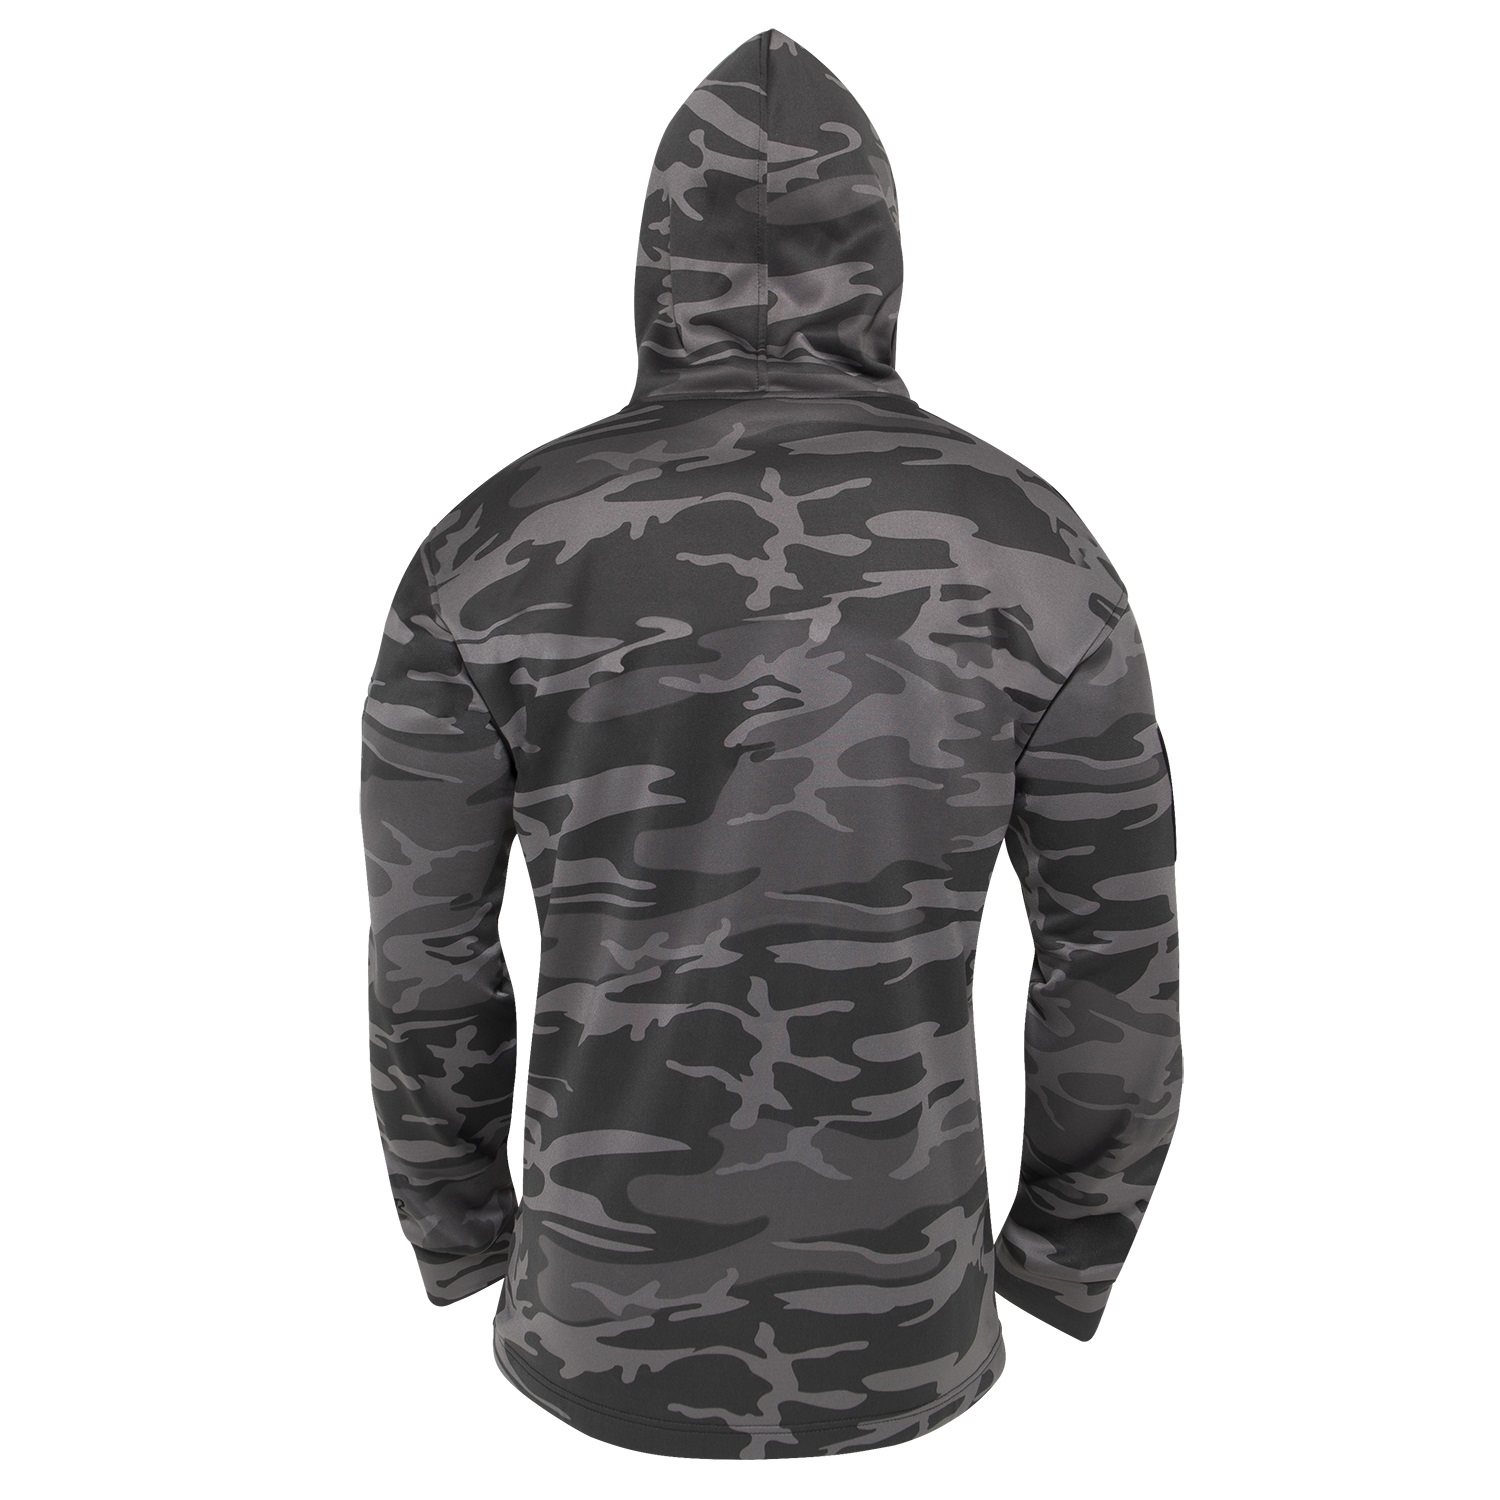 ROTHCO Concealed Carry Hoodie BLACK CAMO | Army surplus MILITARY RANGE